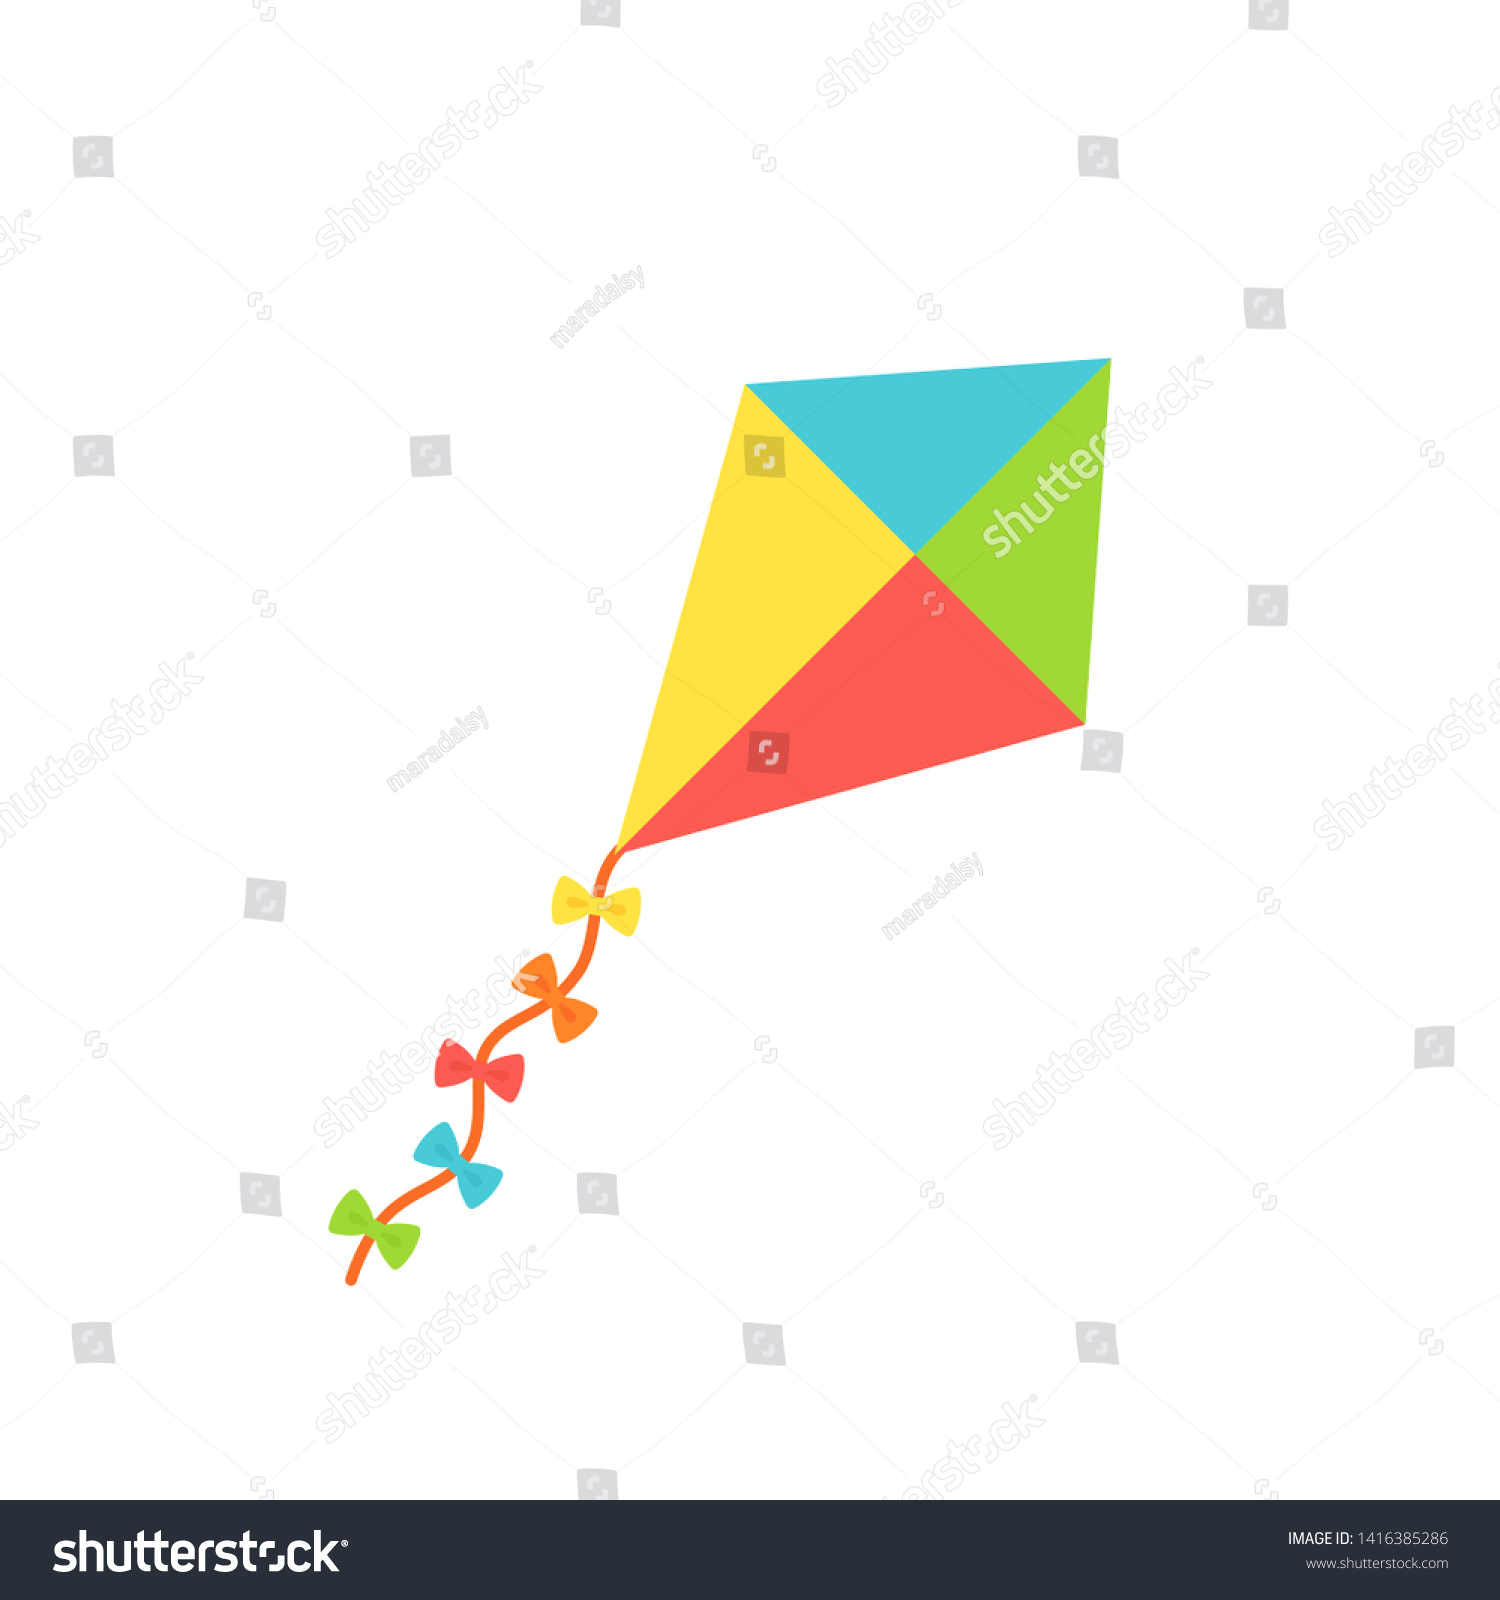 SVG of Kite baby toy. Vector. Kids toy icon isolated on white background in flat design. Colorful cartoon illustration. svg